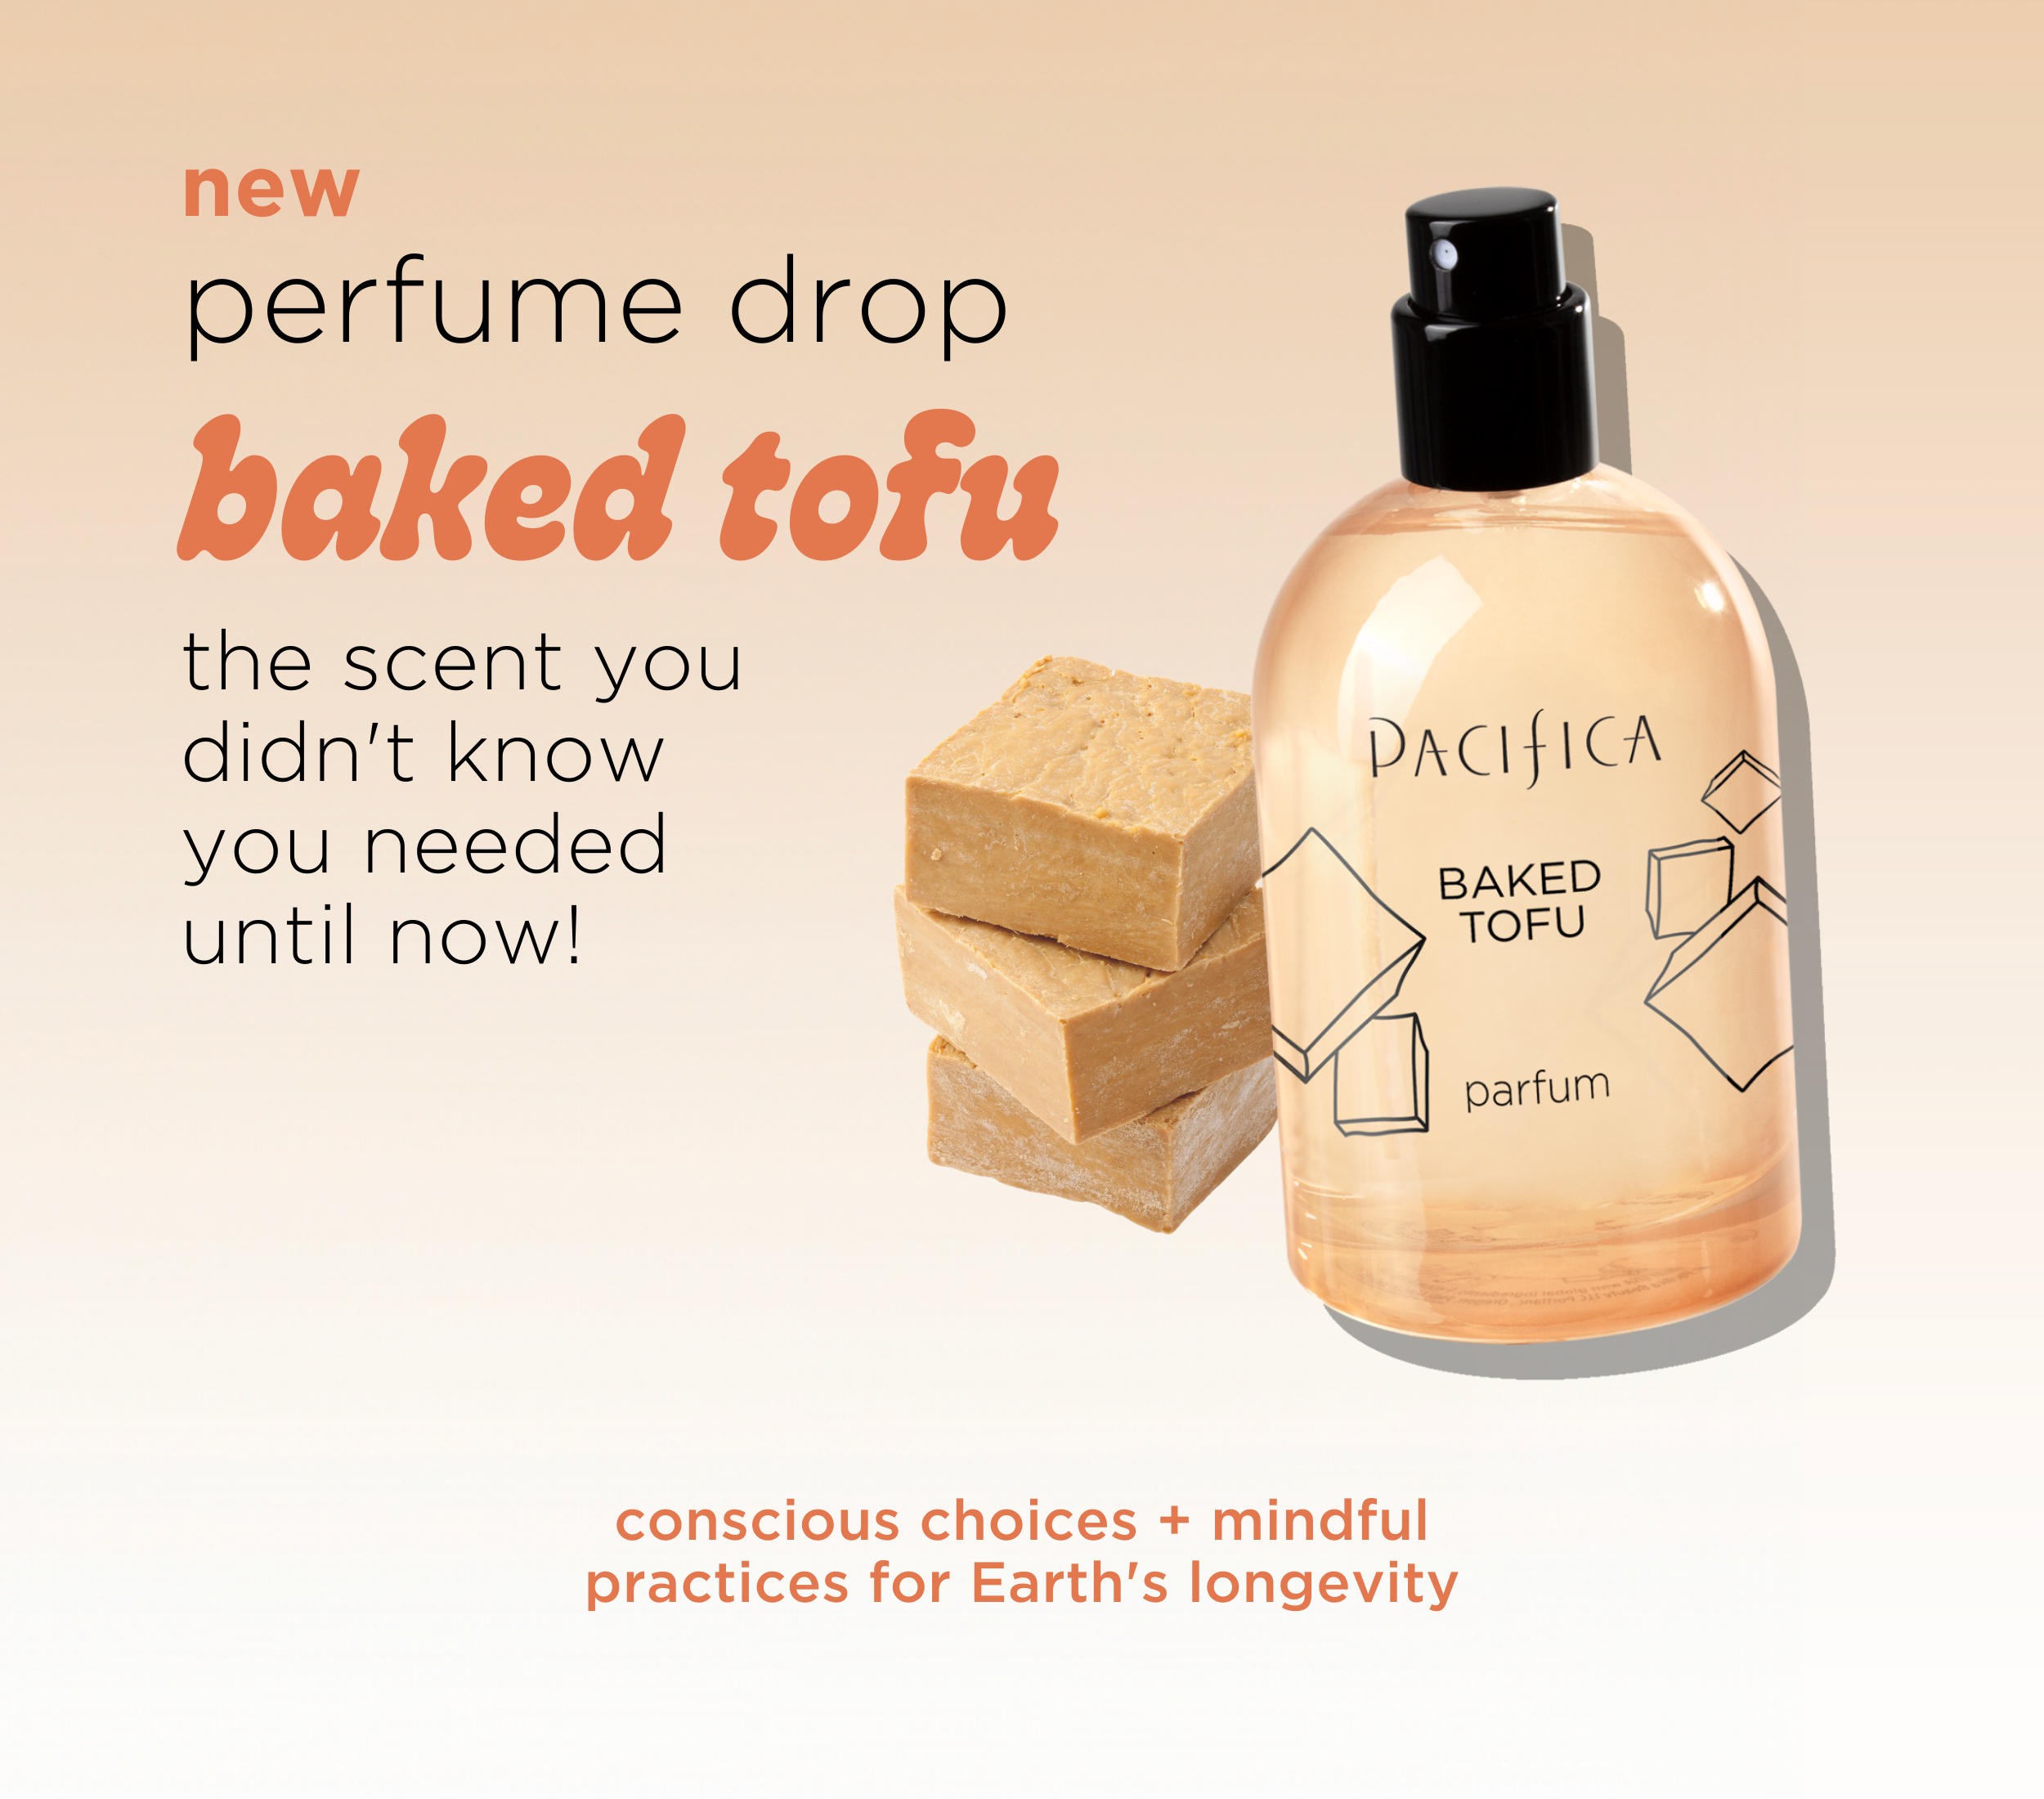 New Perfume! Baked Tofu Scent. The scent you didn't know you needed until now